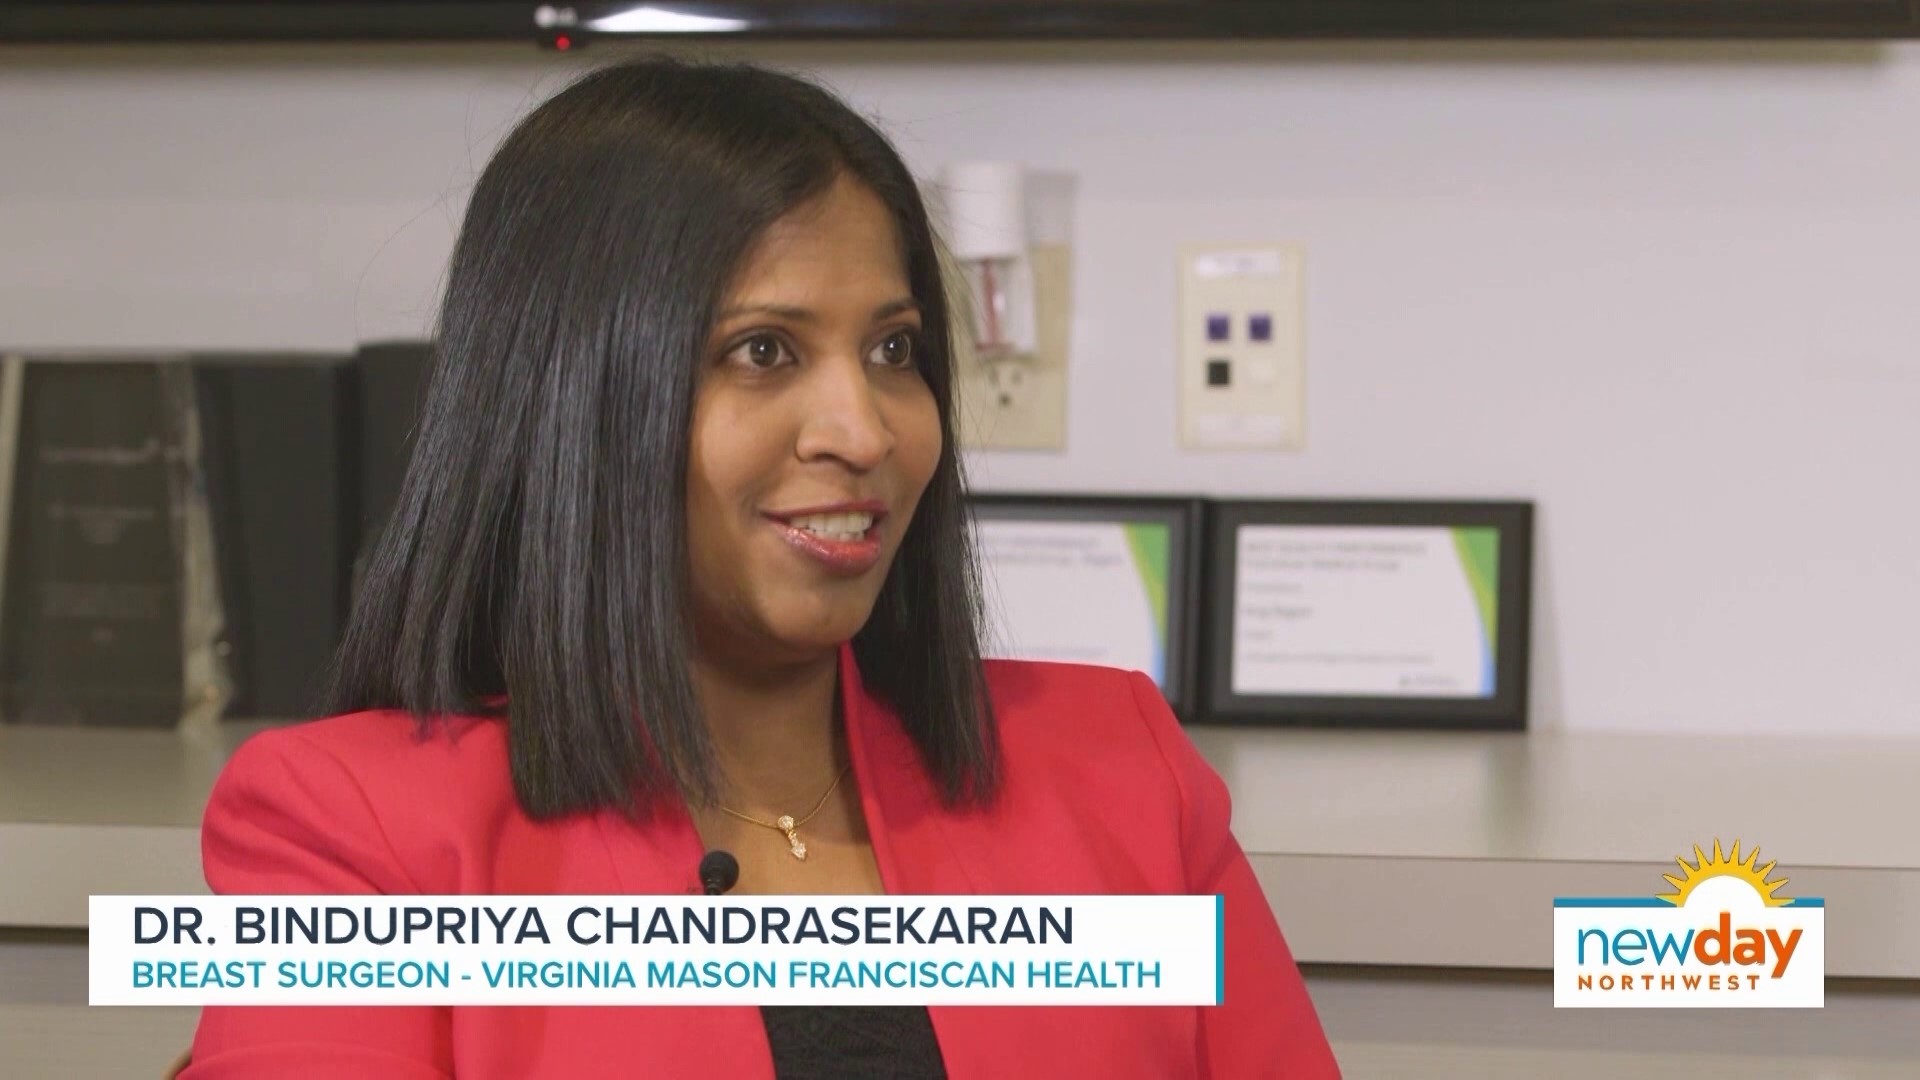 Breast Surgeon Dr. Bindupriya Chandrasekaran explains how common breast cancer is and the importance of screening. Sponsored by Virginia Mason Franciscan Health.